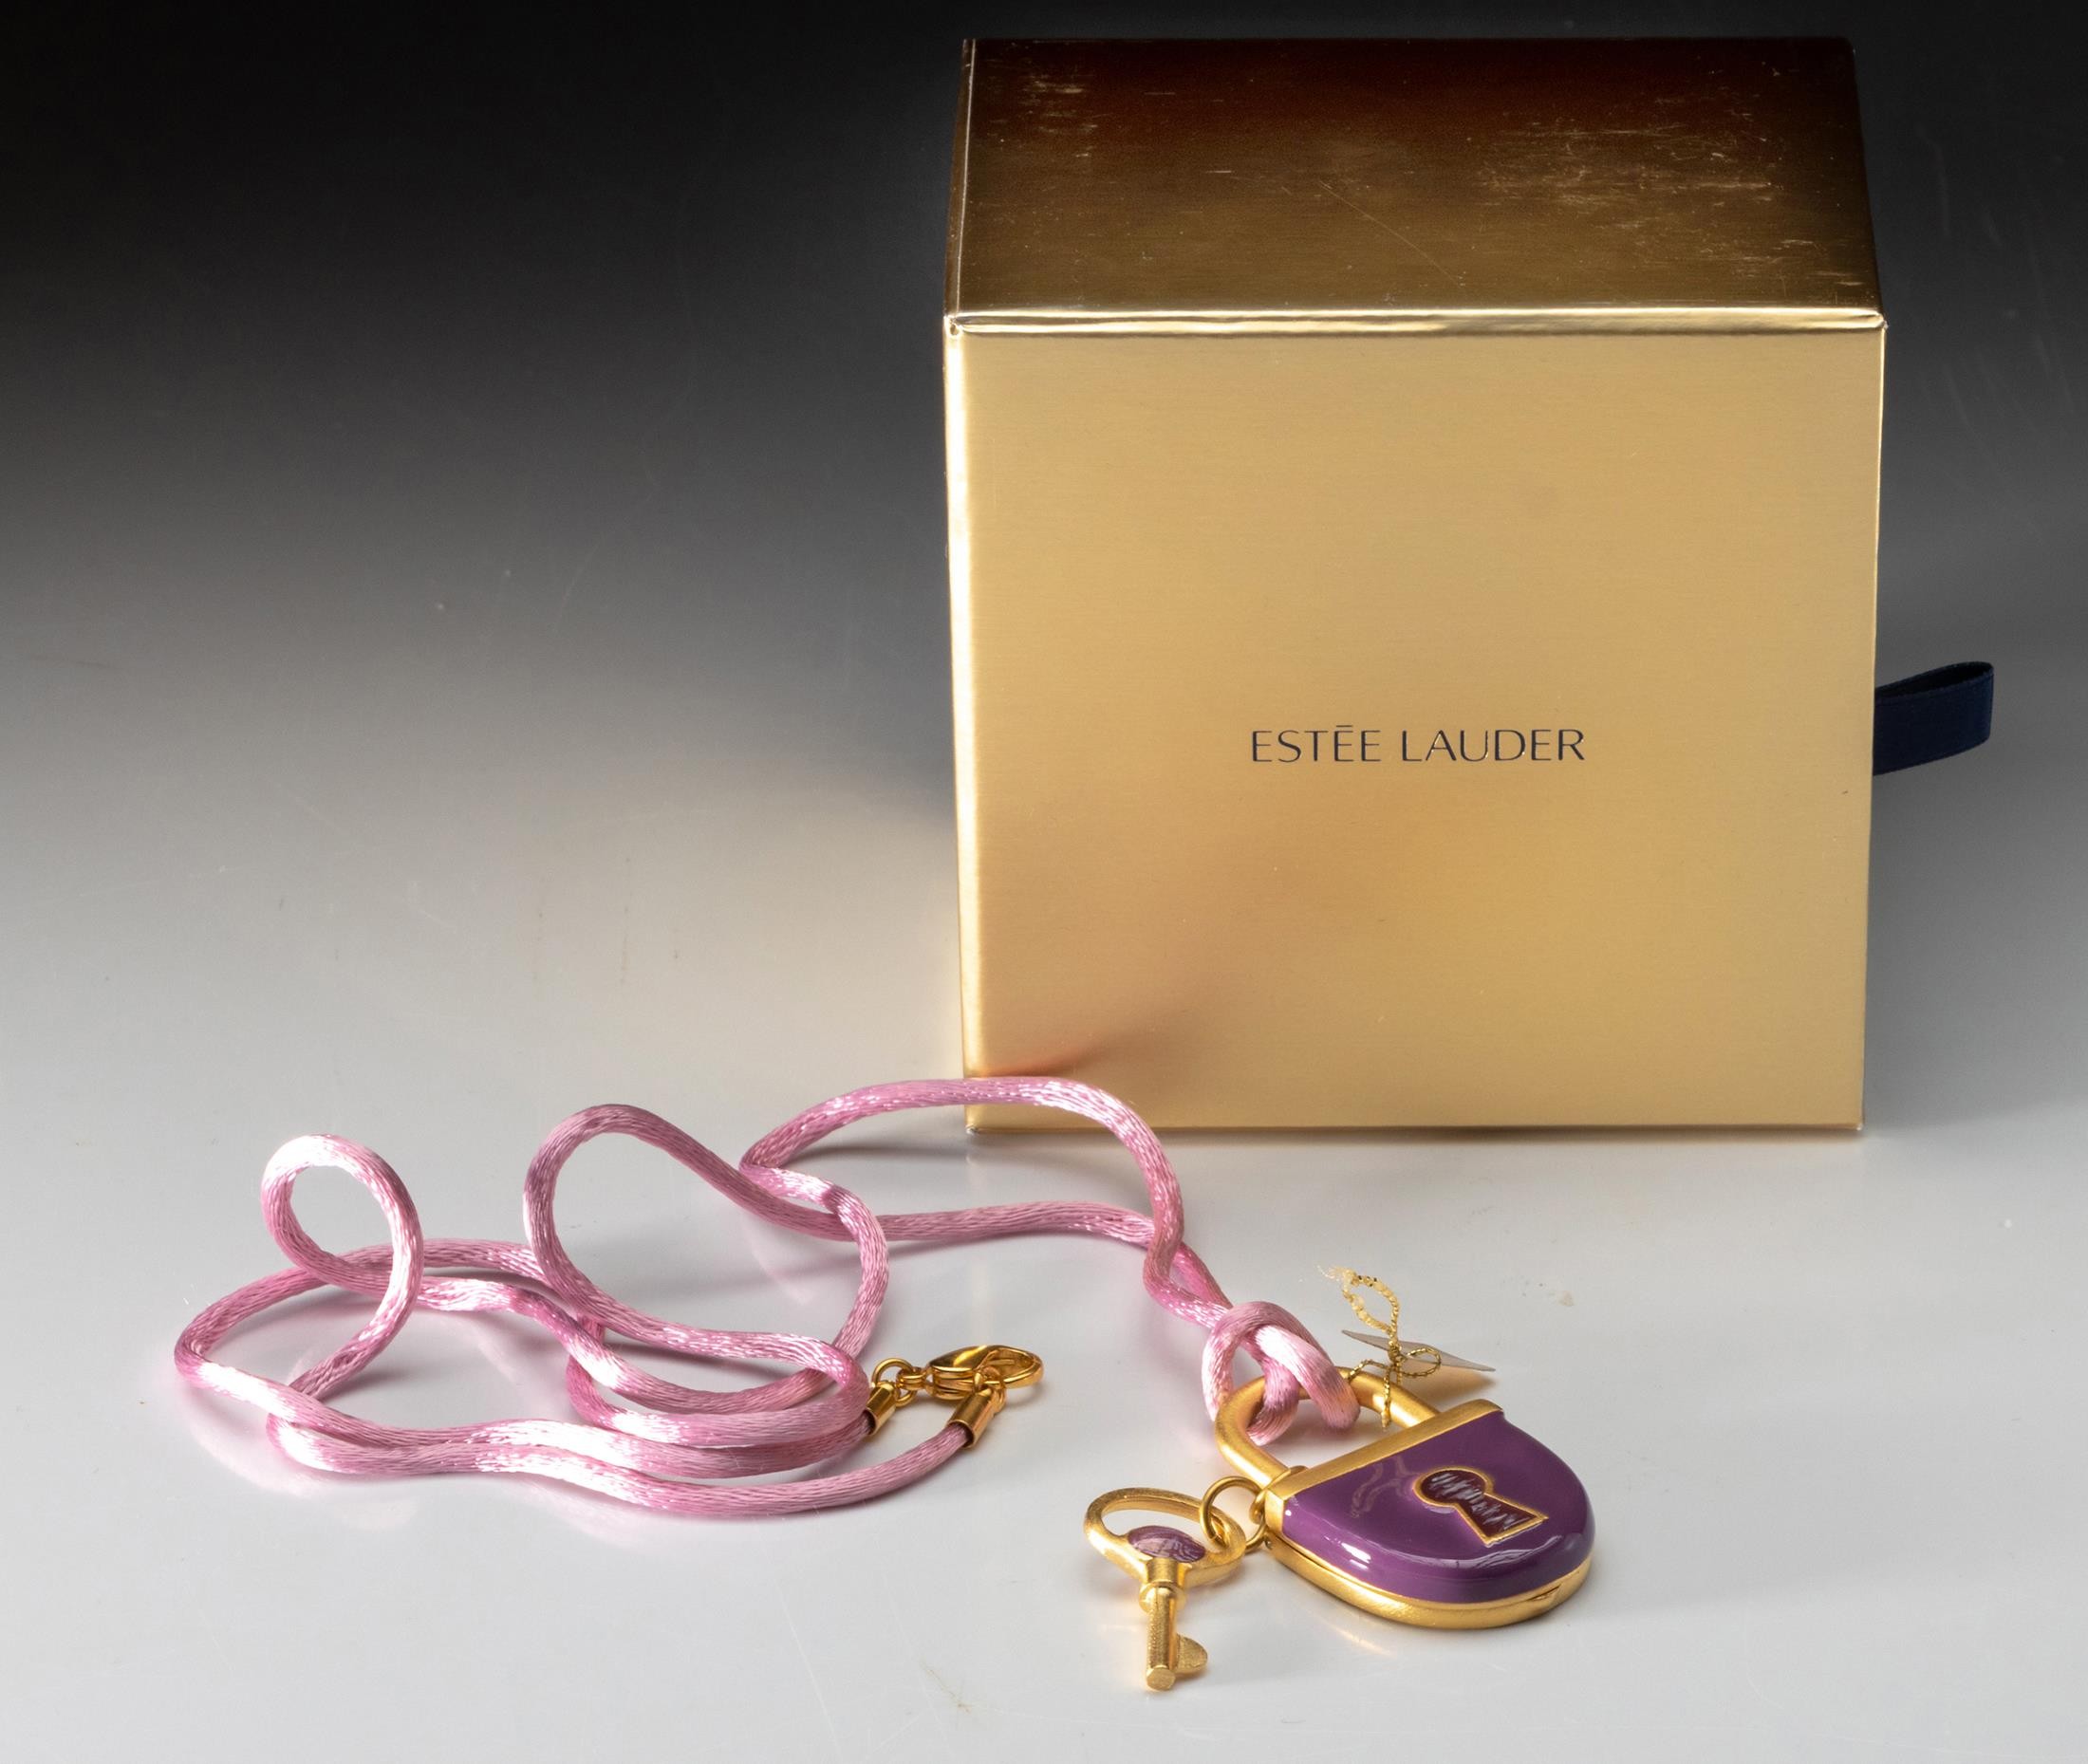 AN ESTEE LAUDER SOLID PERFUME COMPACT, GOOD FORTUNE SUCCESS, 2011 - Image 2 of 2